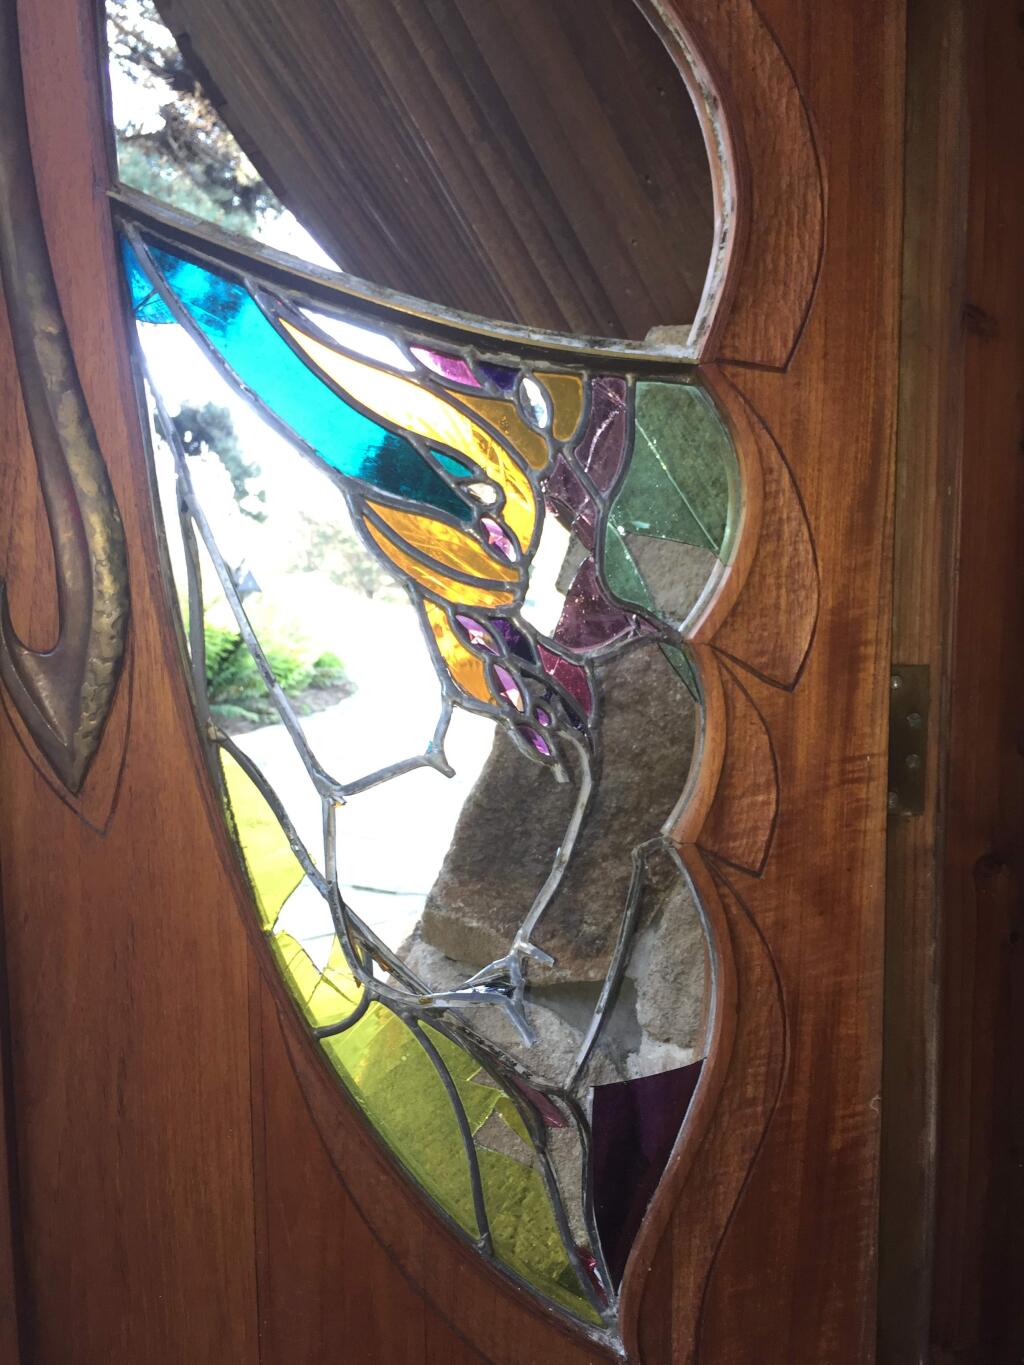 The Sea Ranch Chapel was damaged by vandals during a May break-in. (COURTESY PHOTO)